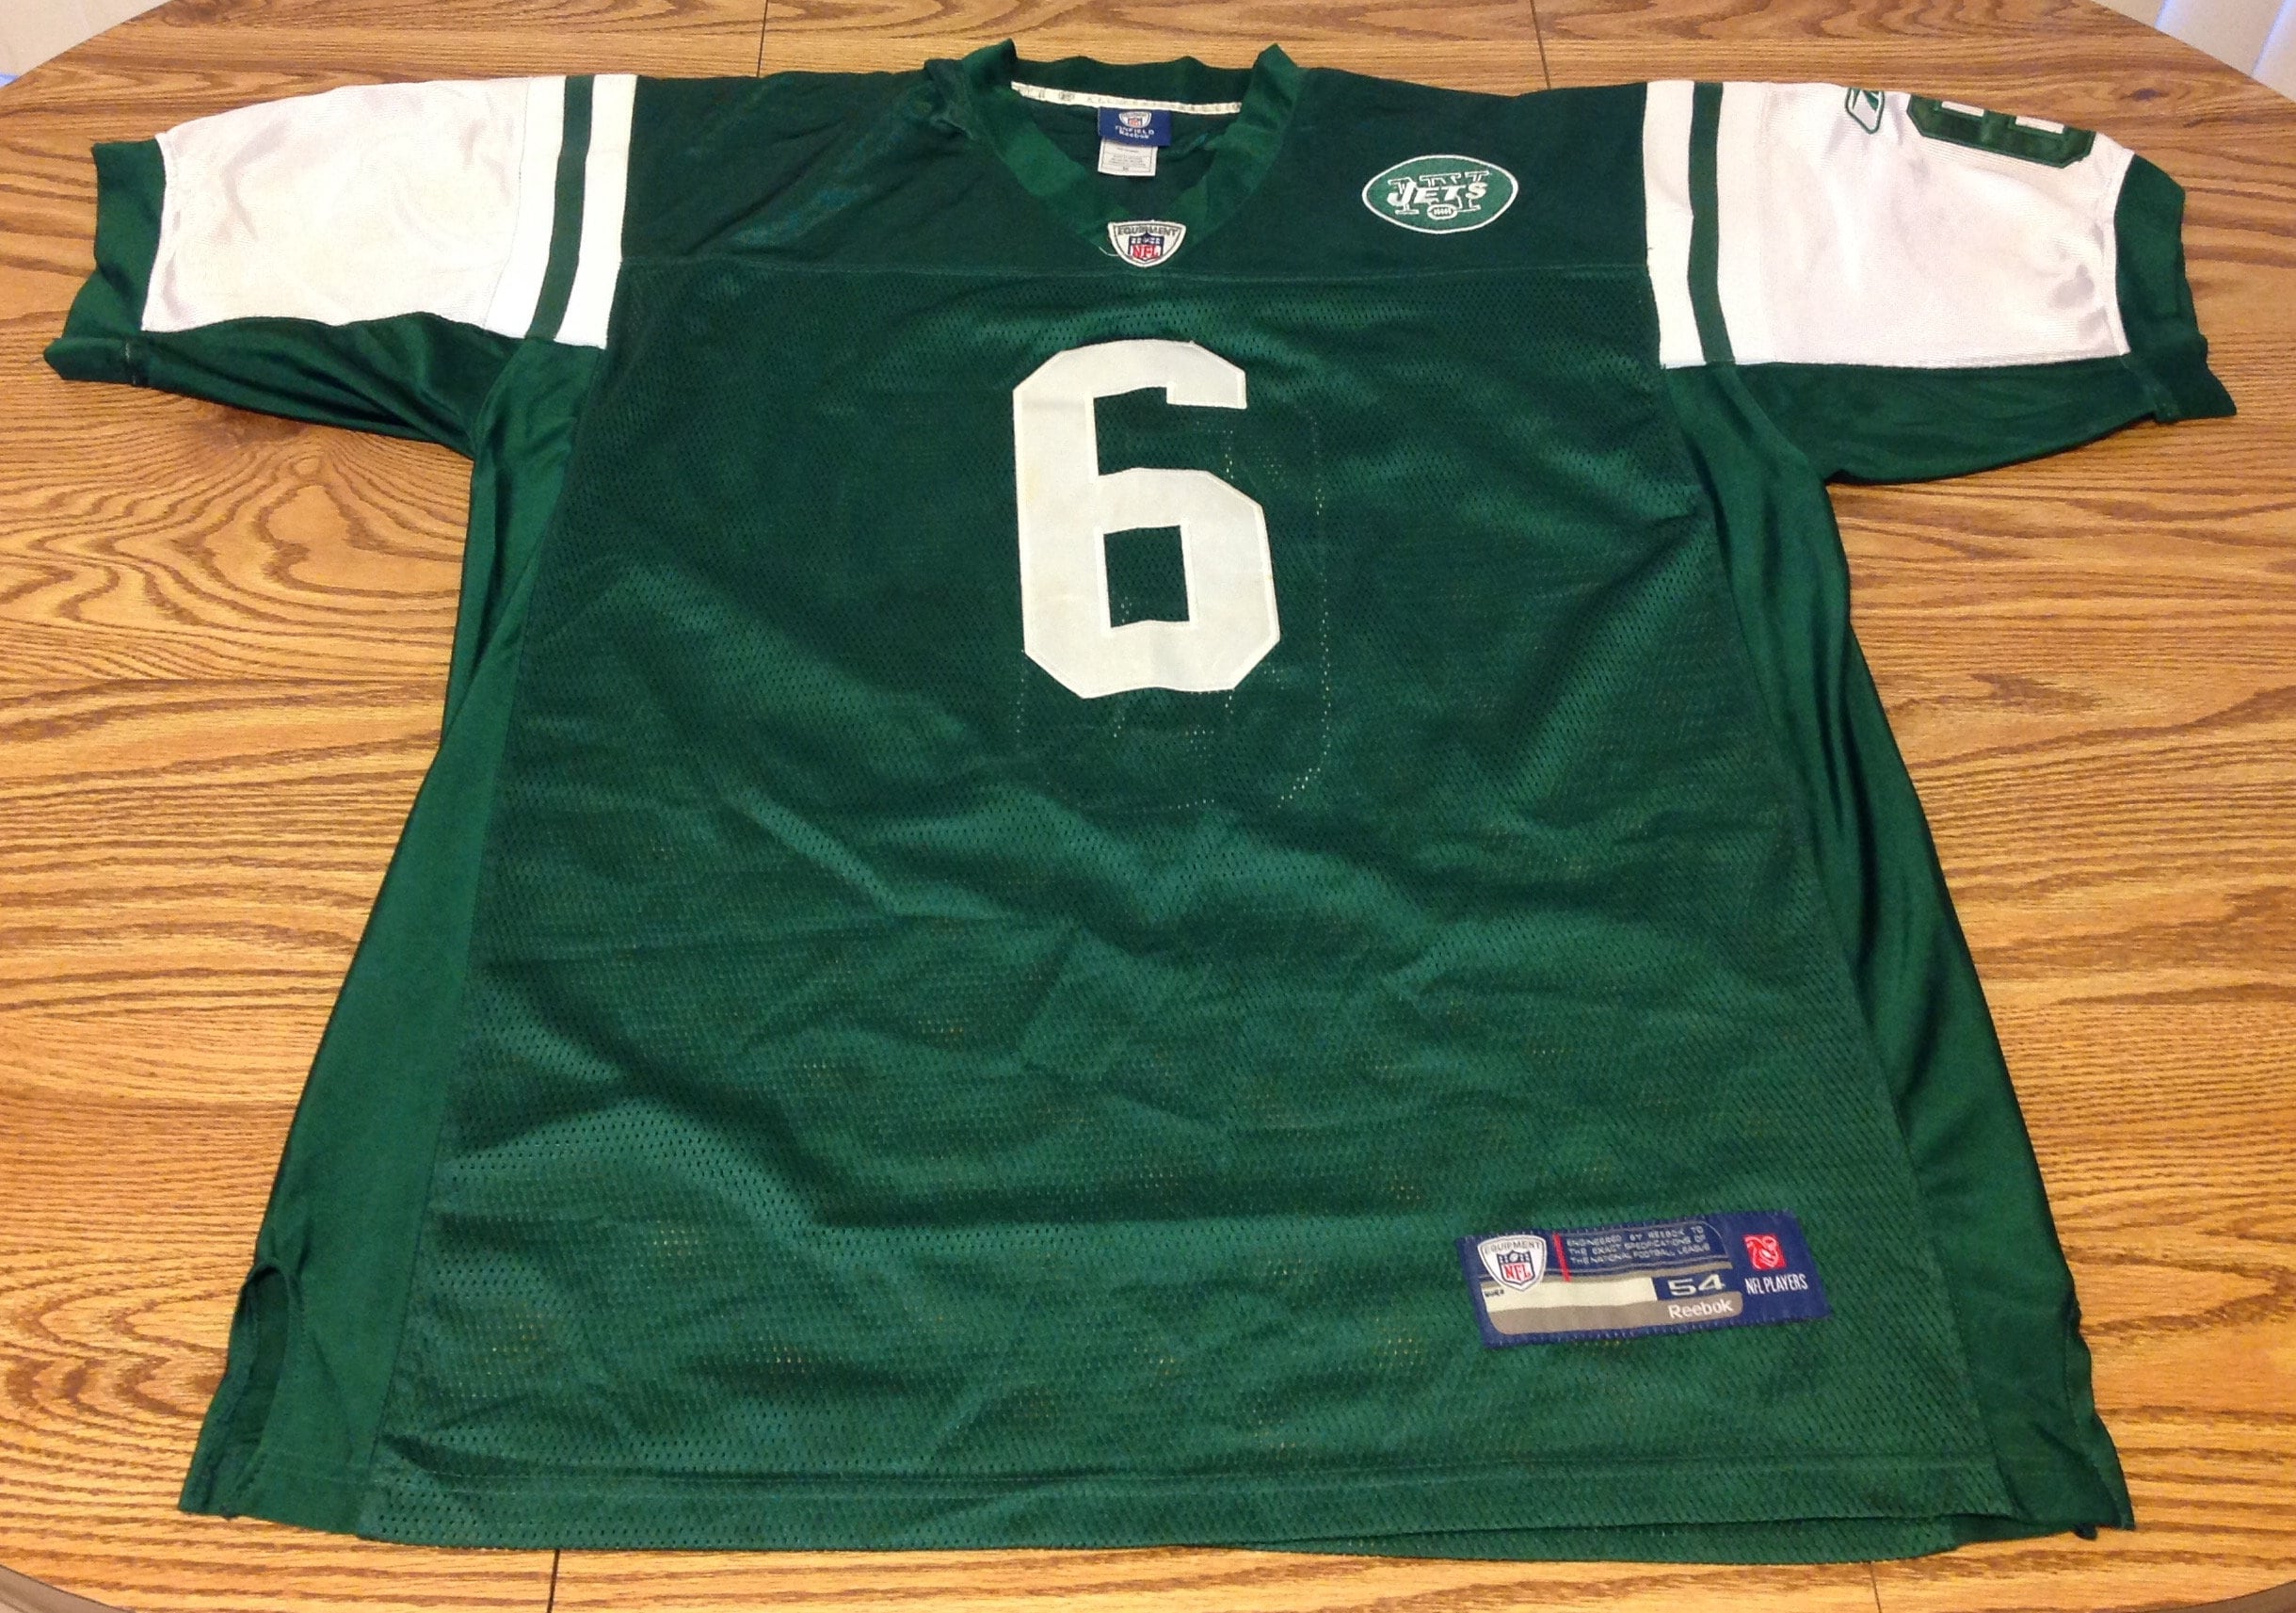 Nike Mark Sanchez New York Jets Youth Game Jersey - White